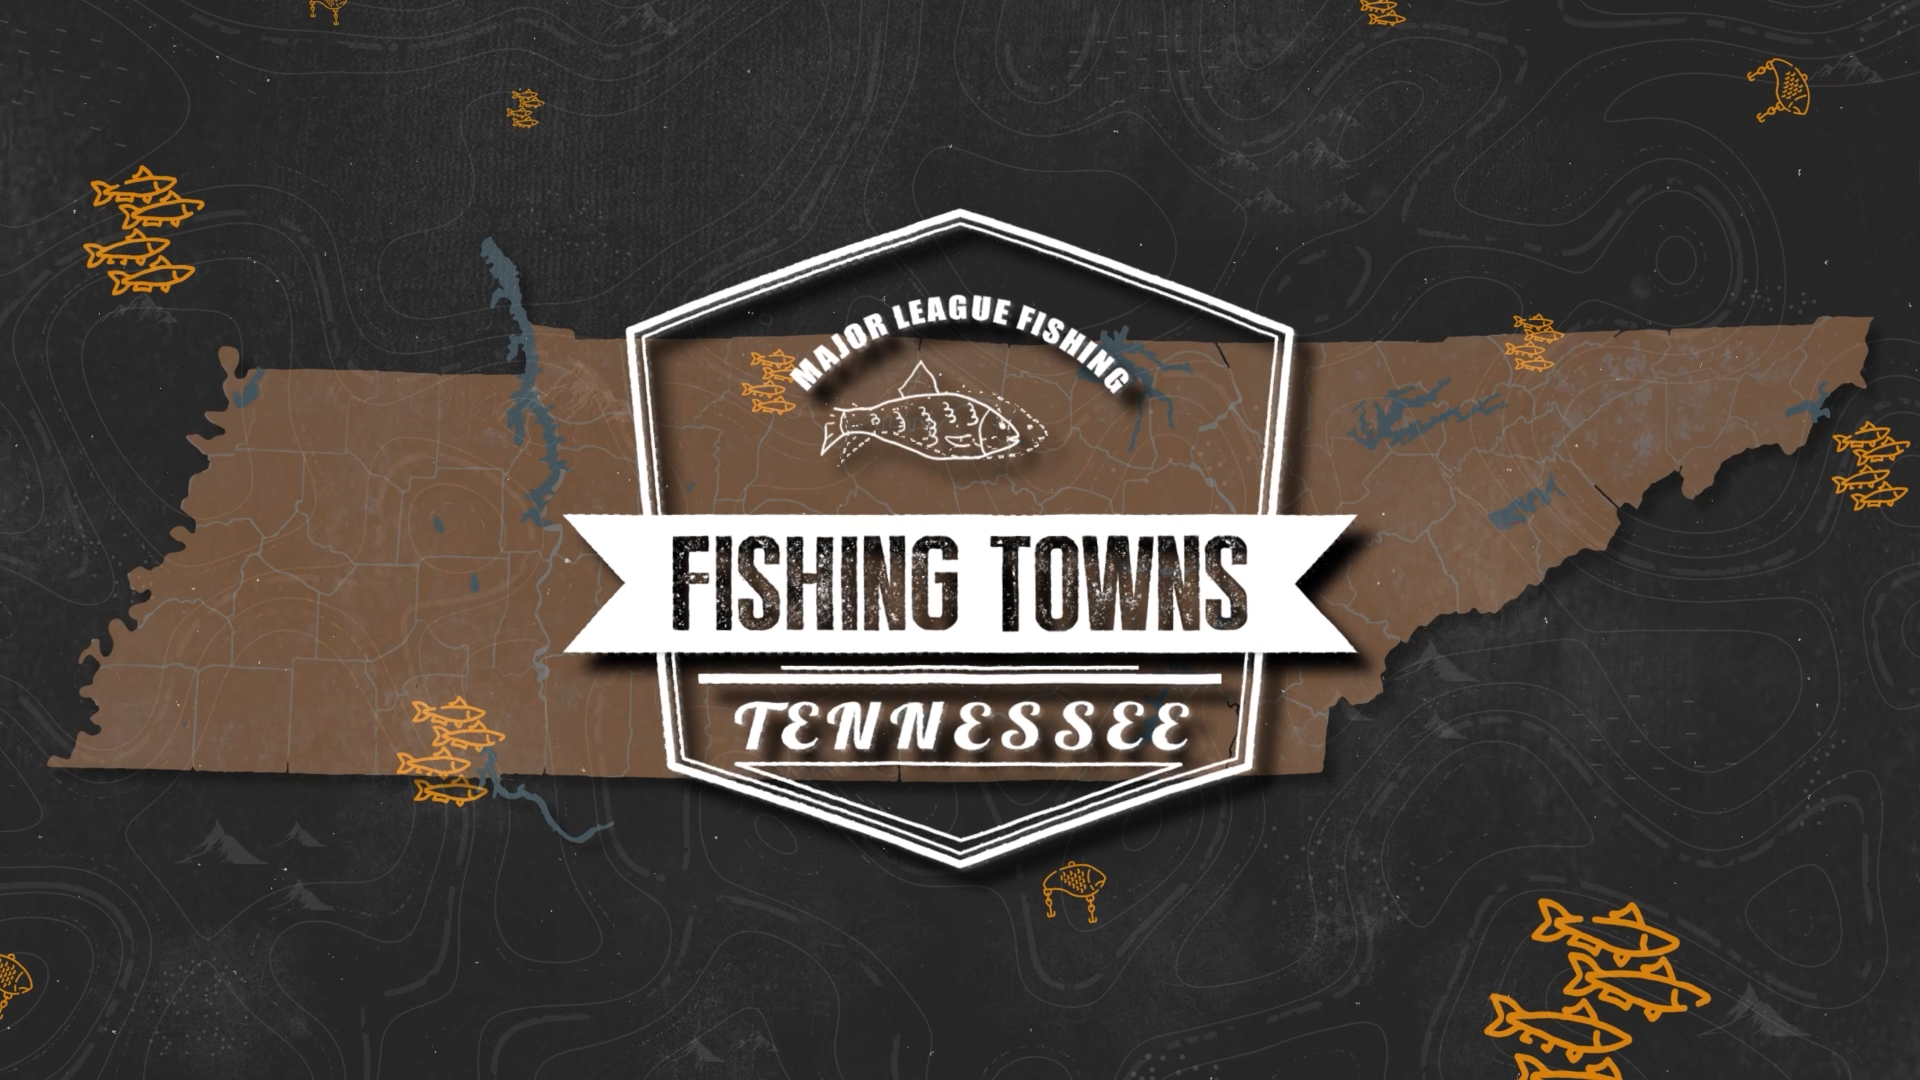 MLF FISHING TOWNS: “The entire state of Tennessee is one big fishing town”  - Major League Fishing